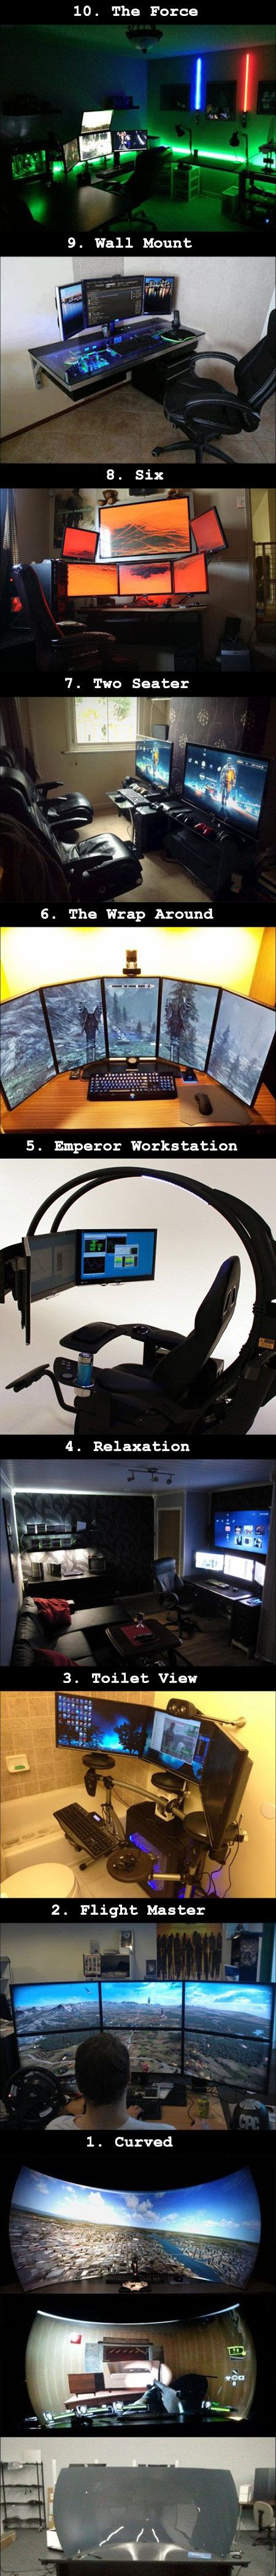 Tired of your laptop or boring desktop computer? Here are 10 awesome computer setups that any geek would love.